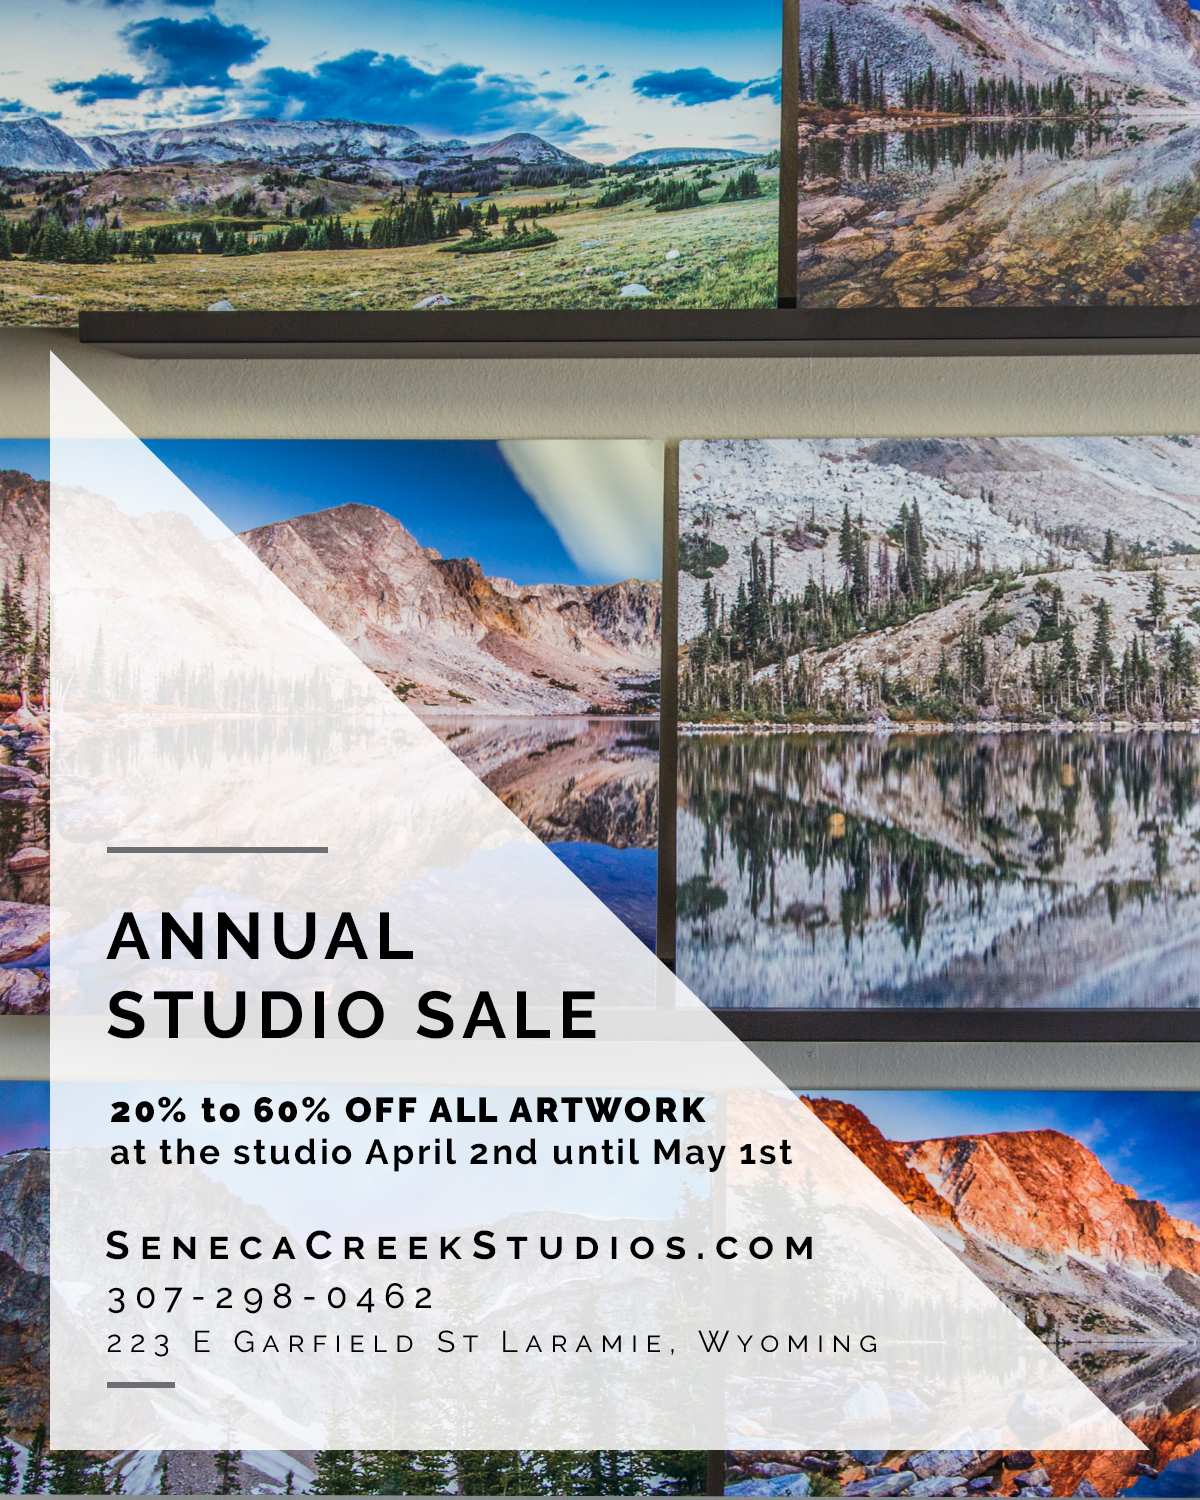 | SenecaCreekStudios.com by Allison Pluda | Fine Art Nature, Landscape, & Wildlife Archival Wall Prints from the Rocky Mountains | Metal Aluminum Photography Prints | Archival Framed Matted Wall Prints | Wyoming & Western Professional Photography & Astrophotography | Gifts, Souvenirs, & Cards | Seneca Creek Studios Art Gallery, Portrait, & Design Studio in historic downtown Laramie, Wyoming also serving Cheyenne, Fort Collins, and the Front Range of Northern Colorado | 2018-04-01 Annual Studio Sale Blog Posts_14 Snowy Range Mountains, Vedauwoo, Medicine Bow National Forest, Poster Print